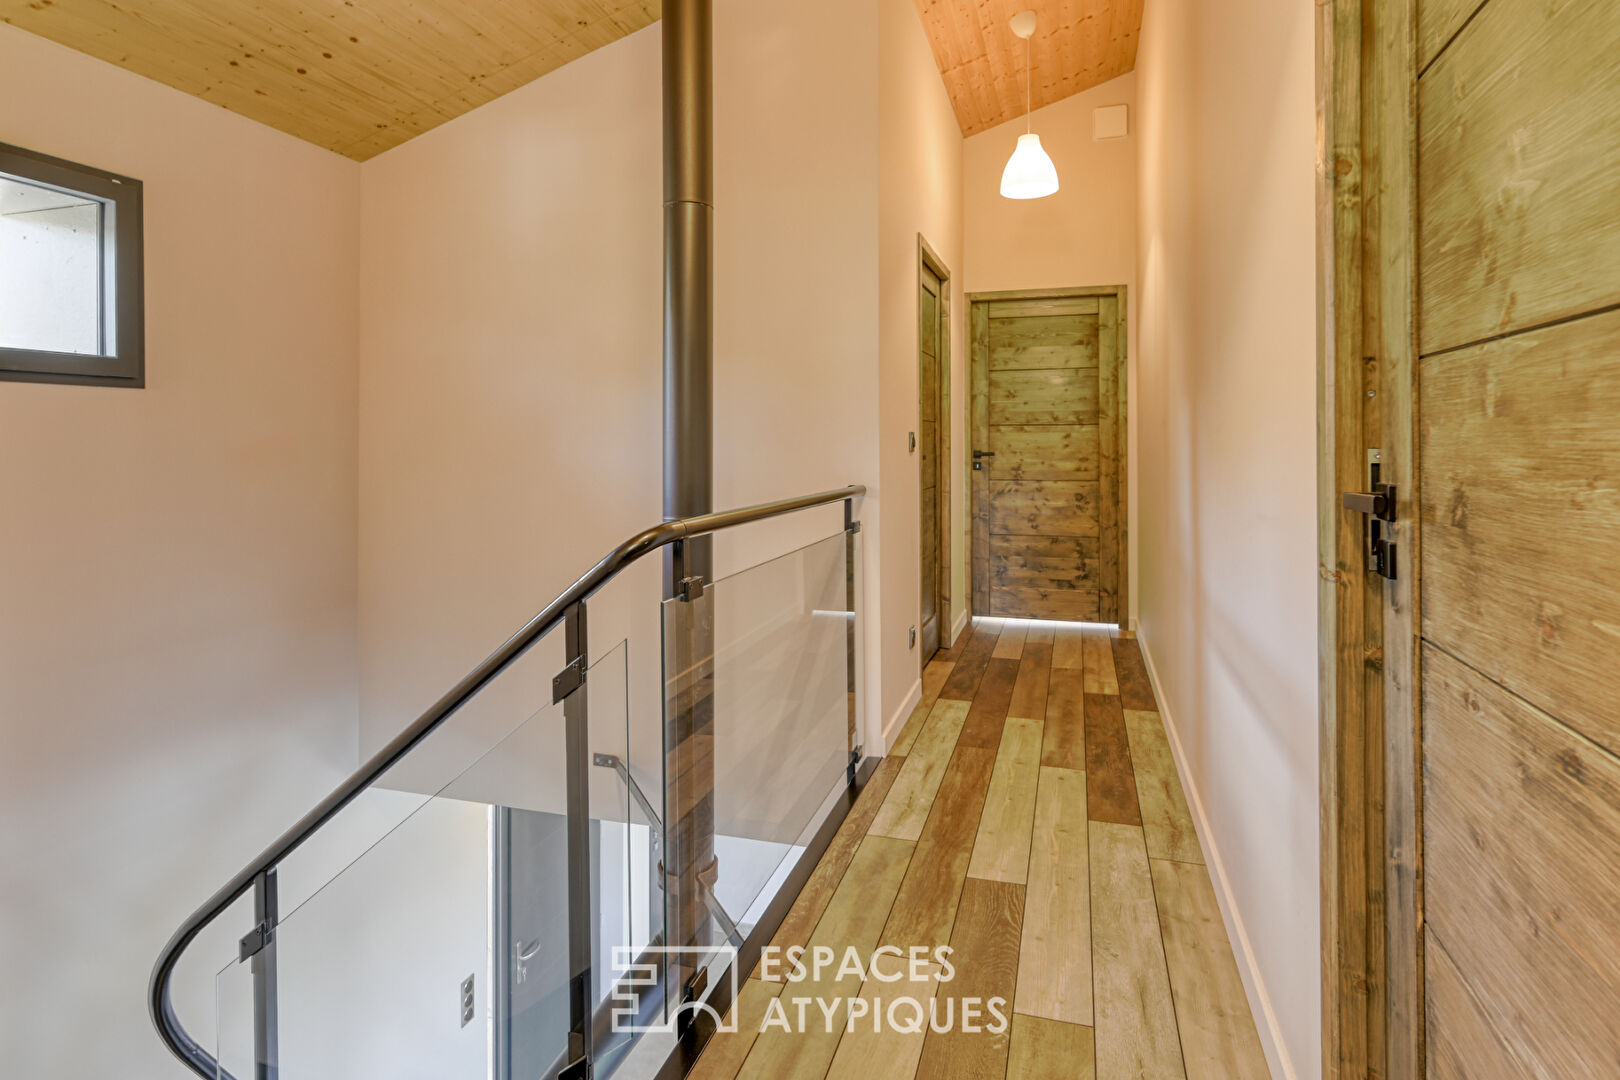 High-end passive house with panoramic views of the Luberon